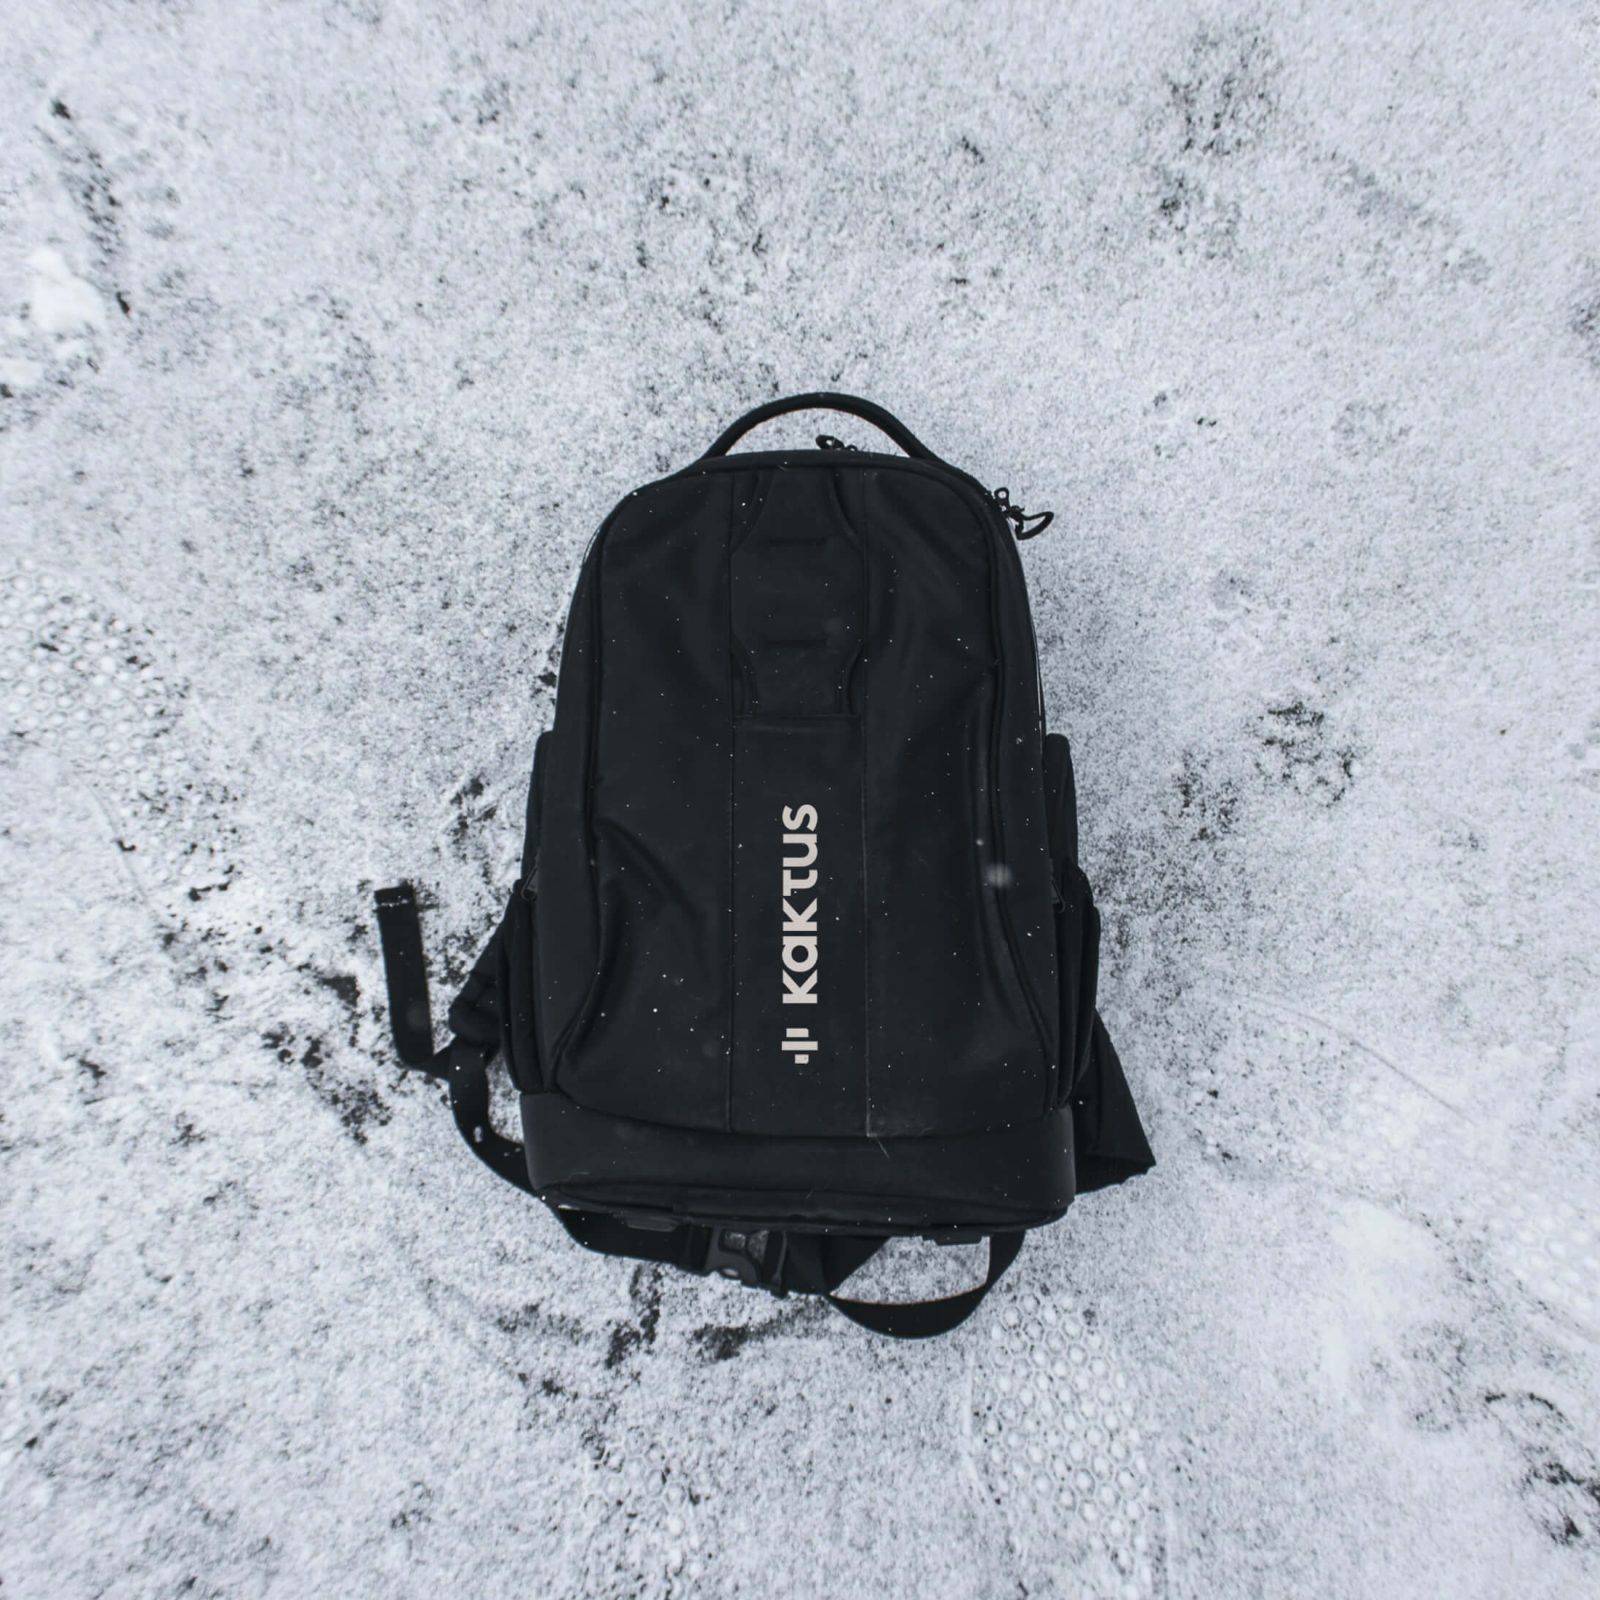 A black backpack with the word 